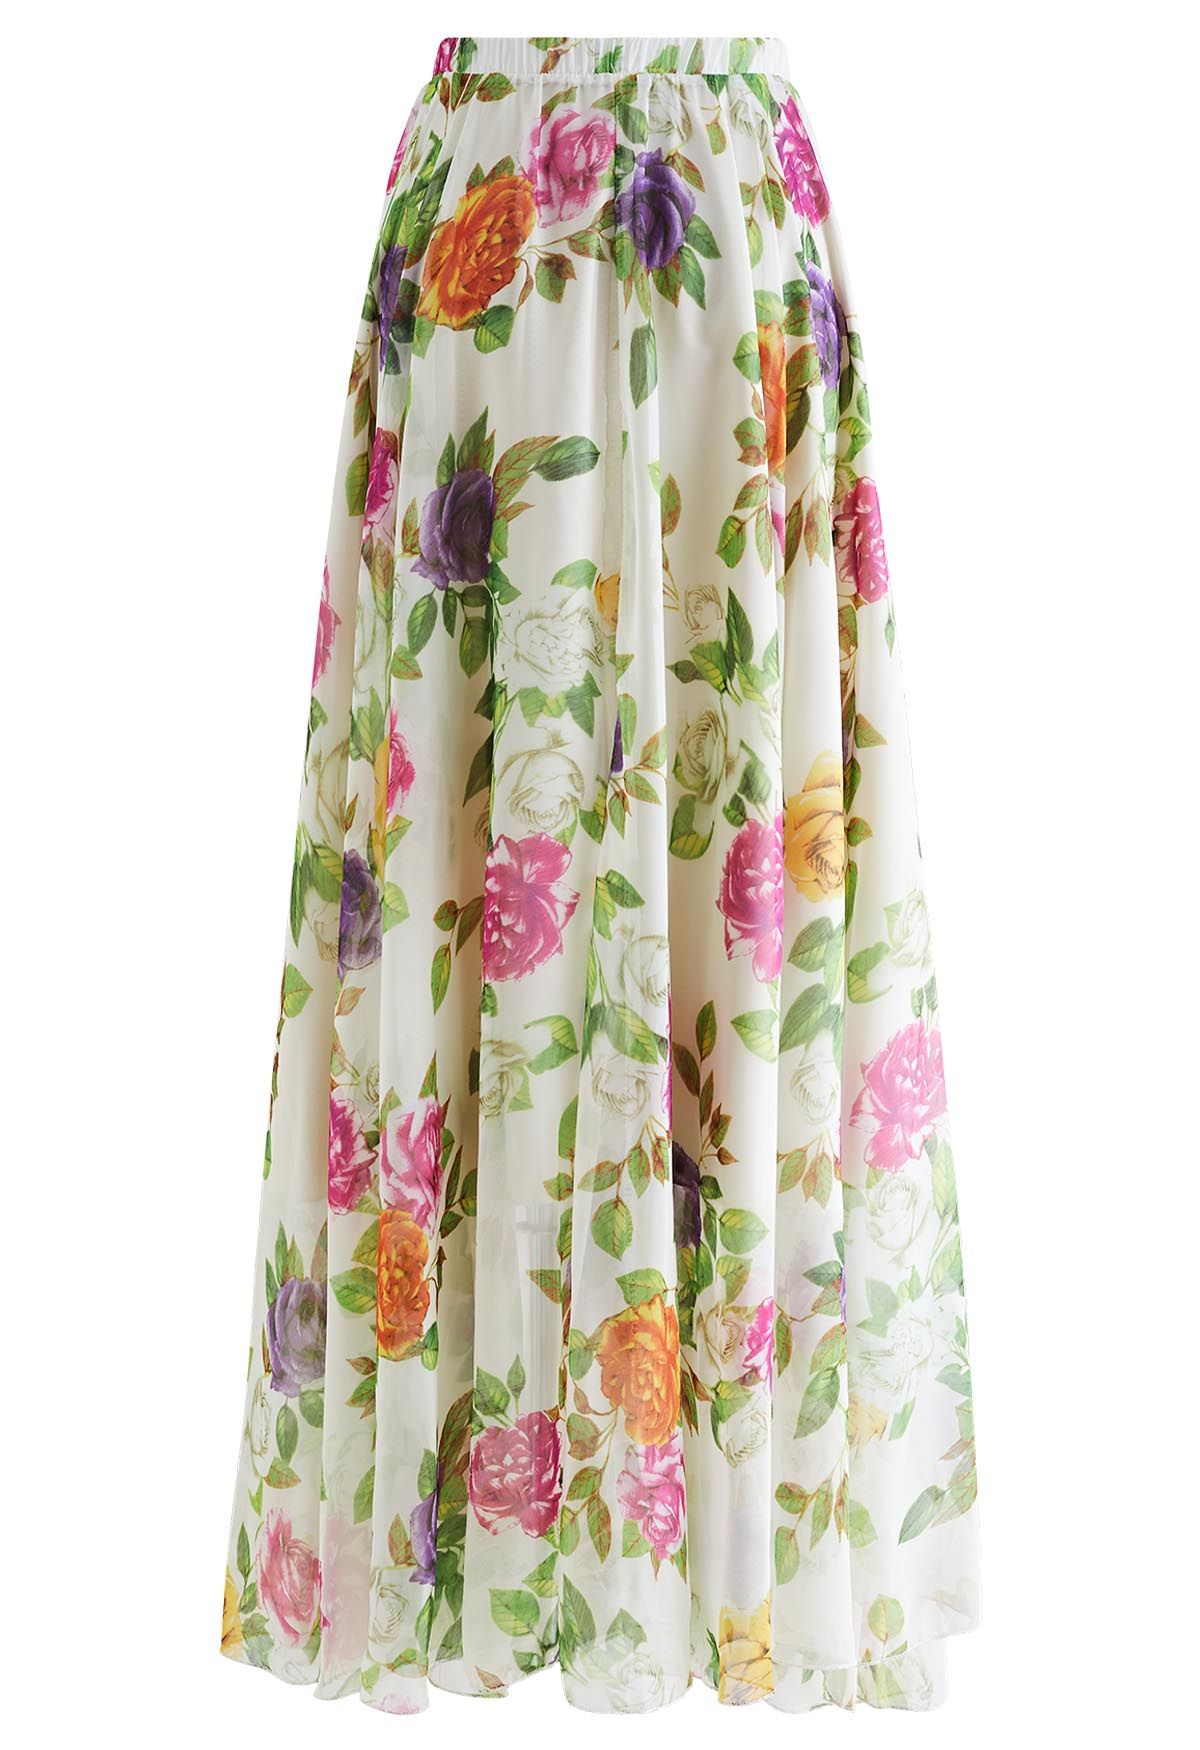 Refreshing Floral Print Chiffon Maxi Skirt - Retro, Indie and Unique ...